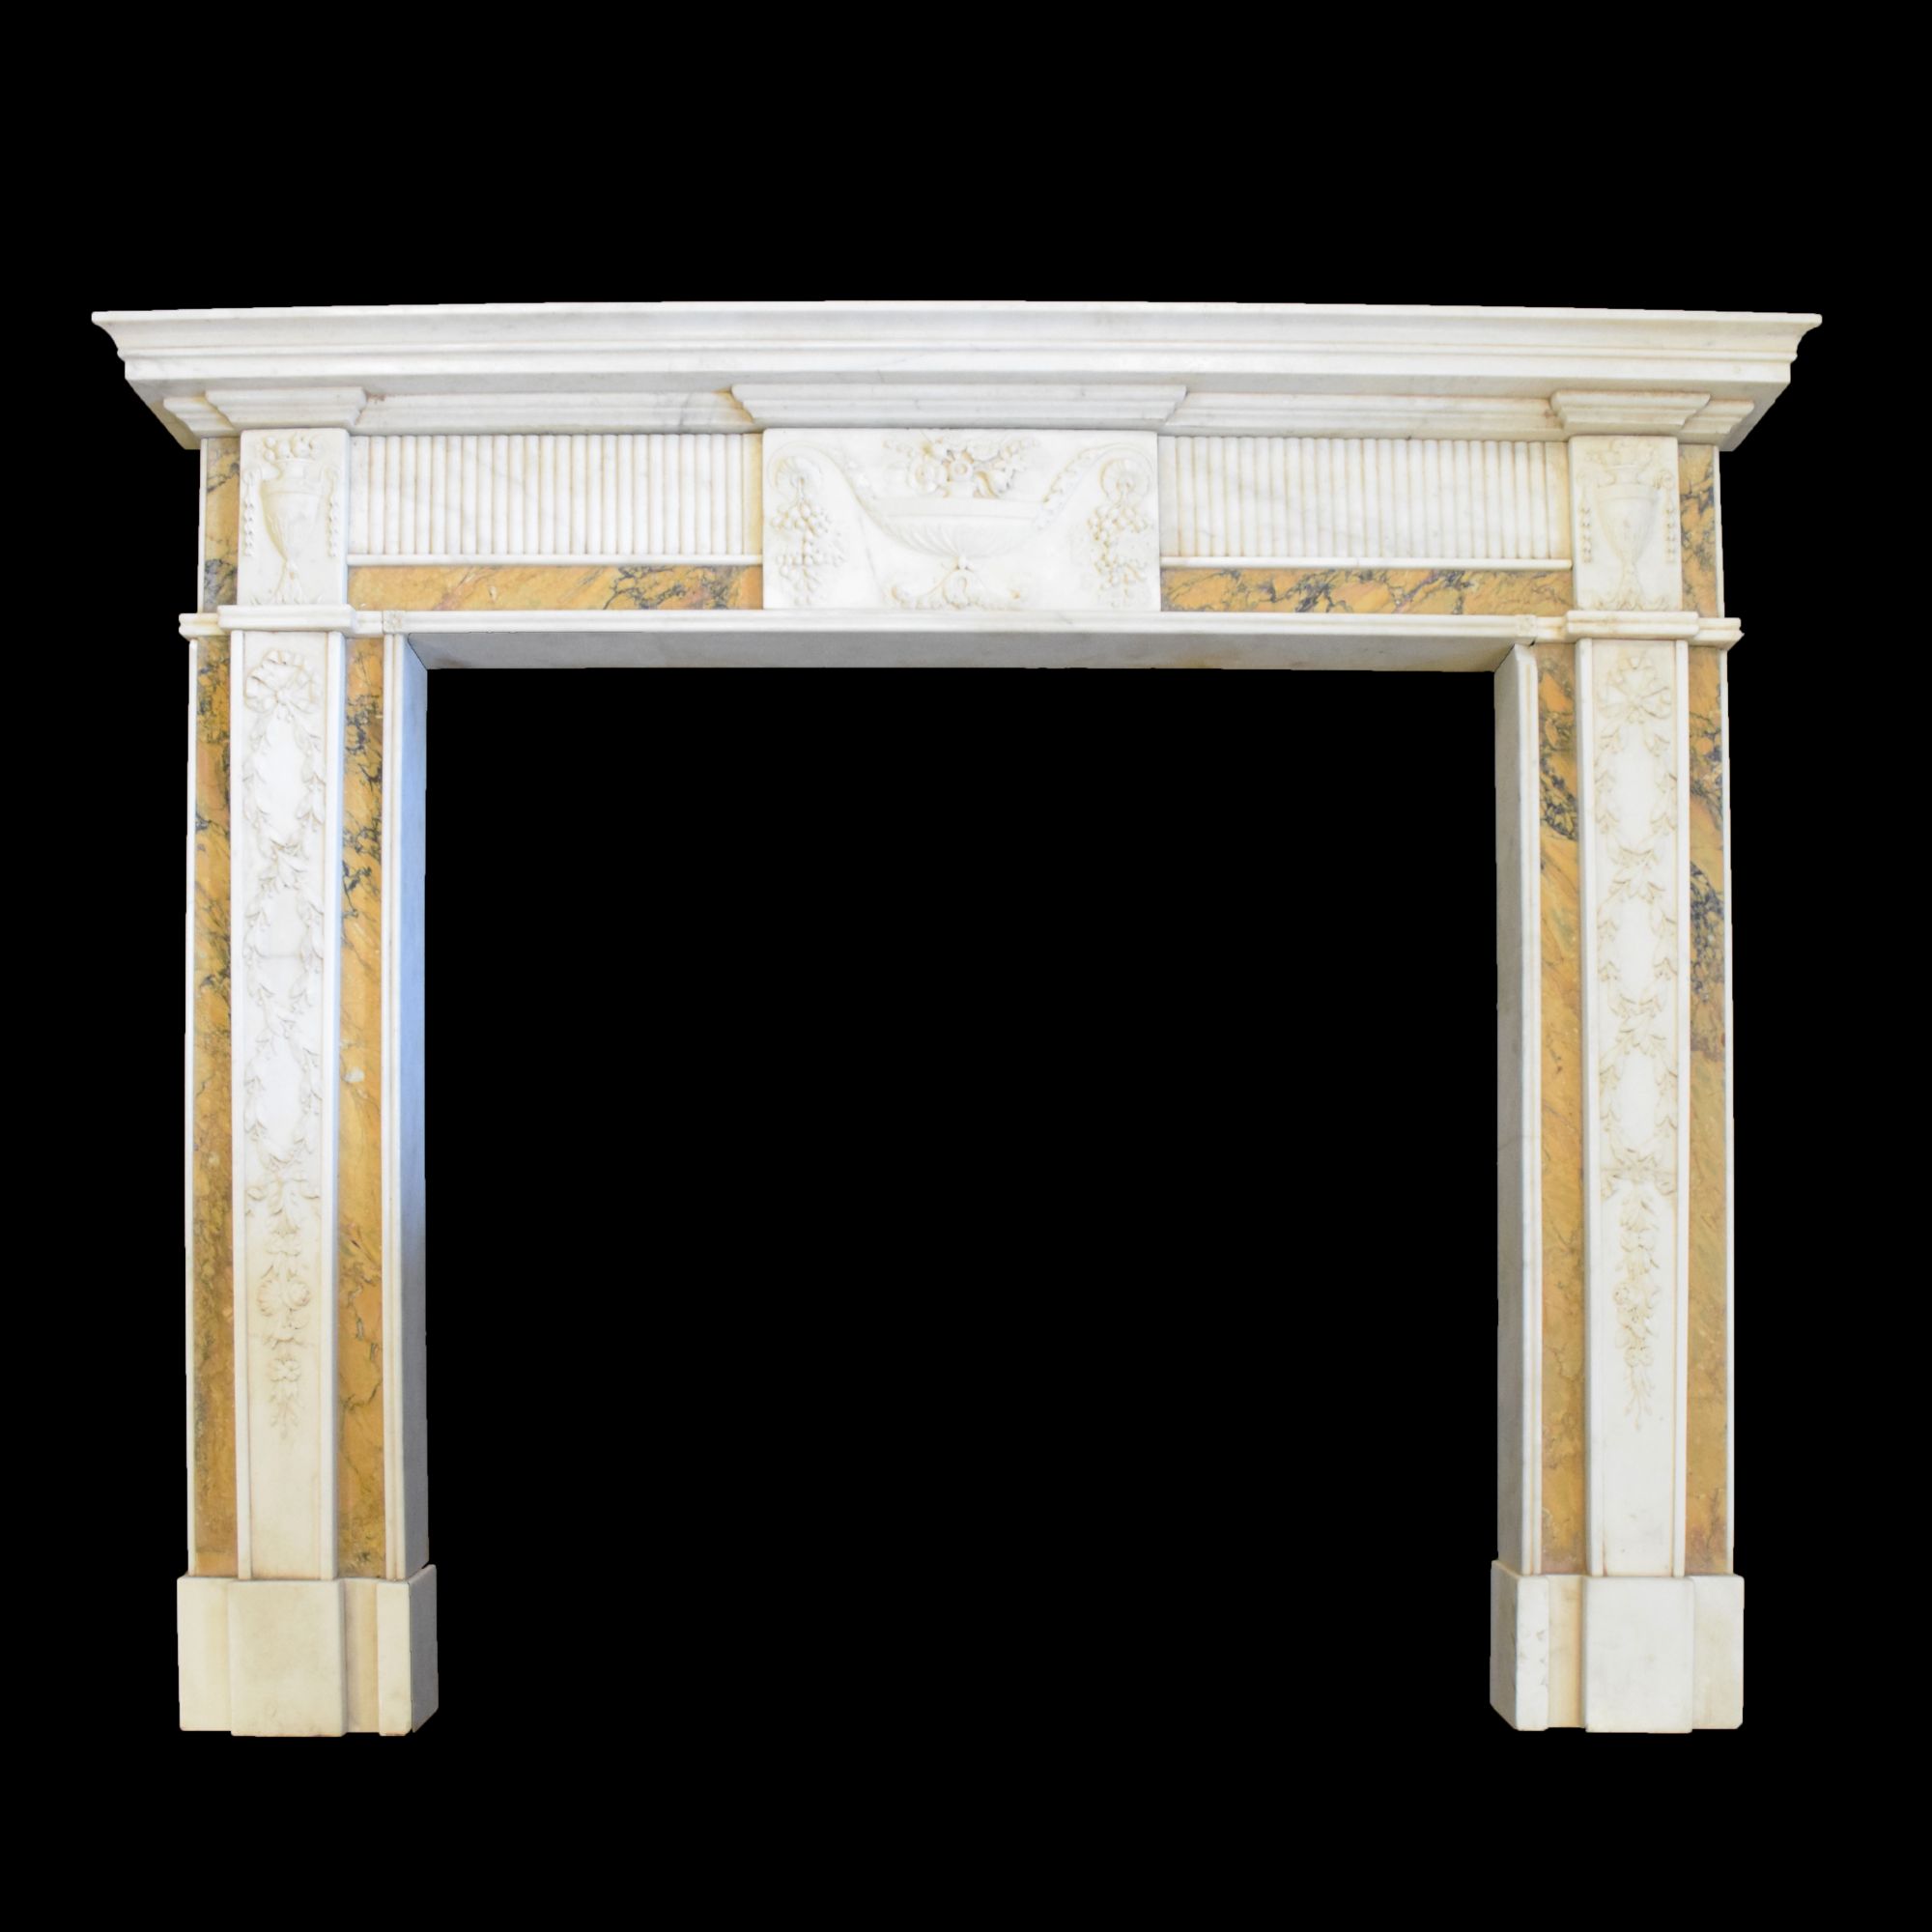 Fine neoclassical style statuary marble chimneypiece or fireplace surround, probably George III period, circa 1790. Sold for £7,200